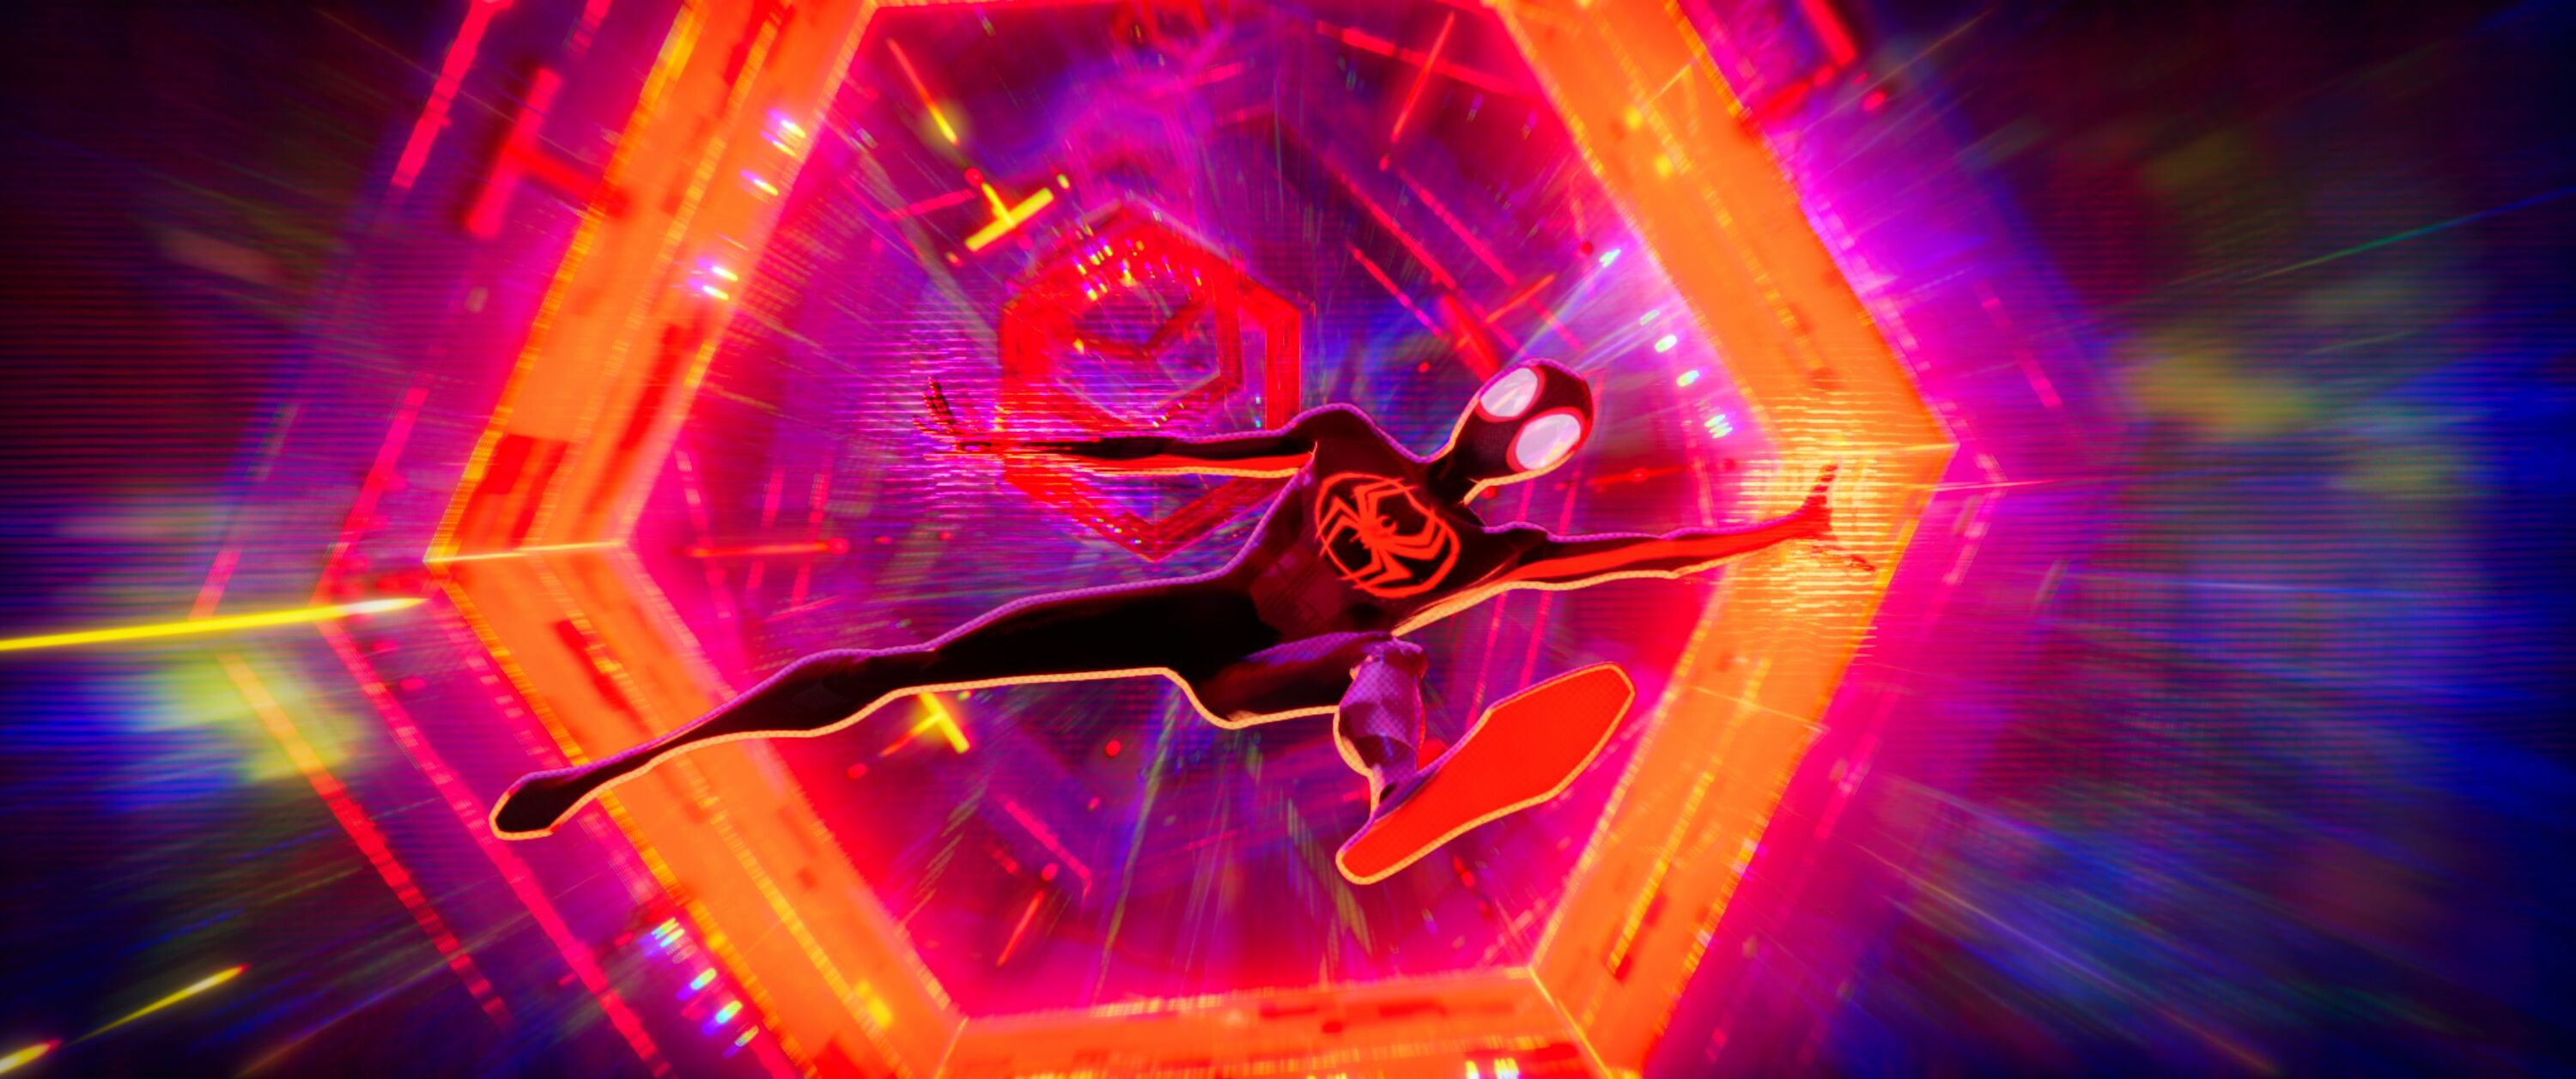 Spider-Man: Across the Spider-Verse Review - Not Great